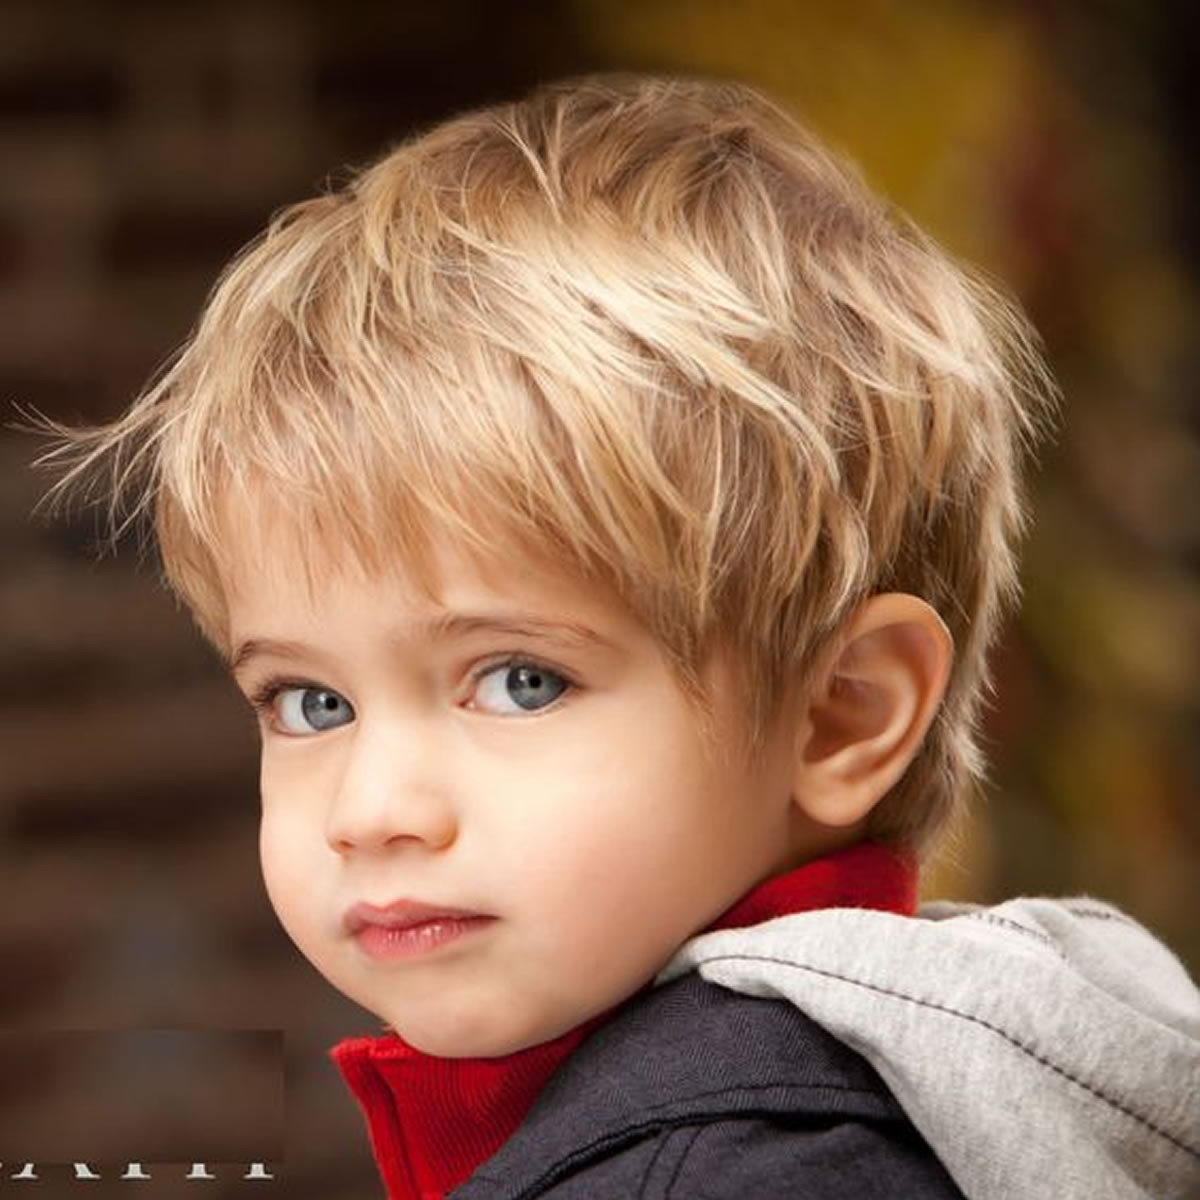 Cute Little Boy Hairstyles
 Great Hairstyles and Haircuts ideas for Little Boys 2018